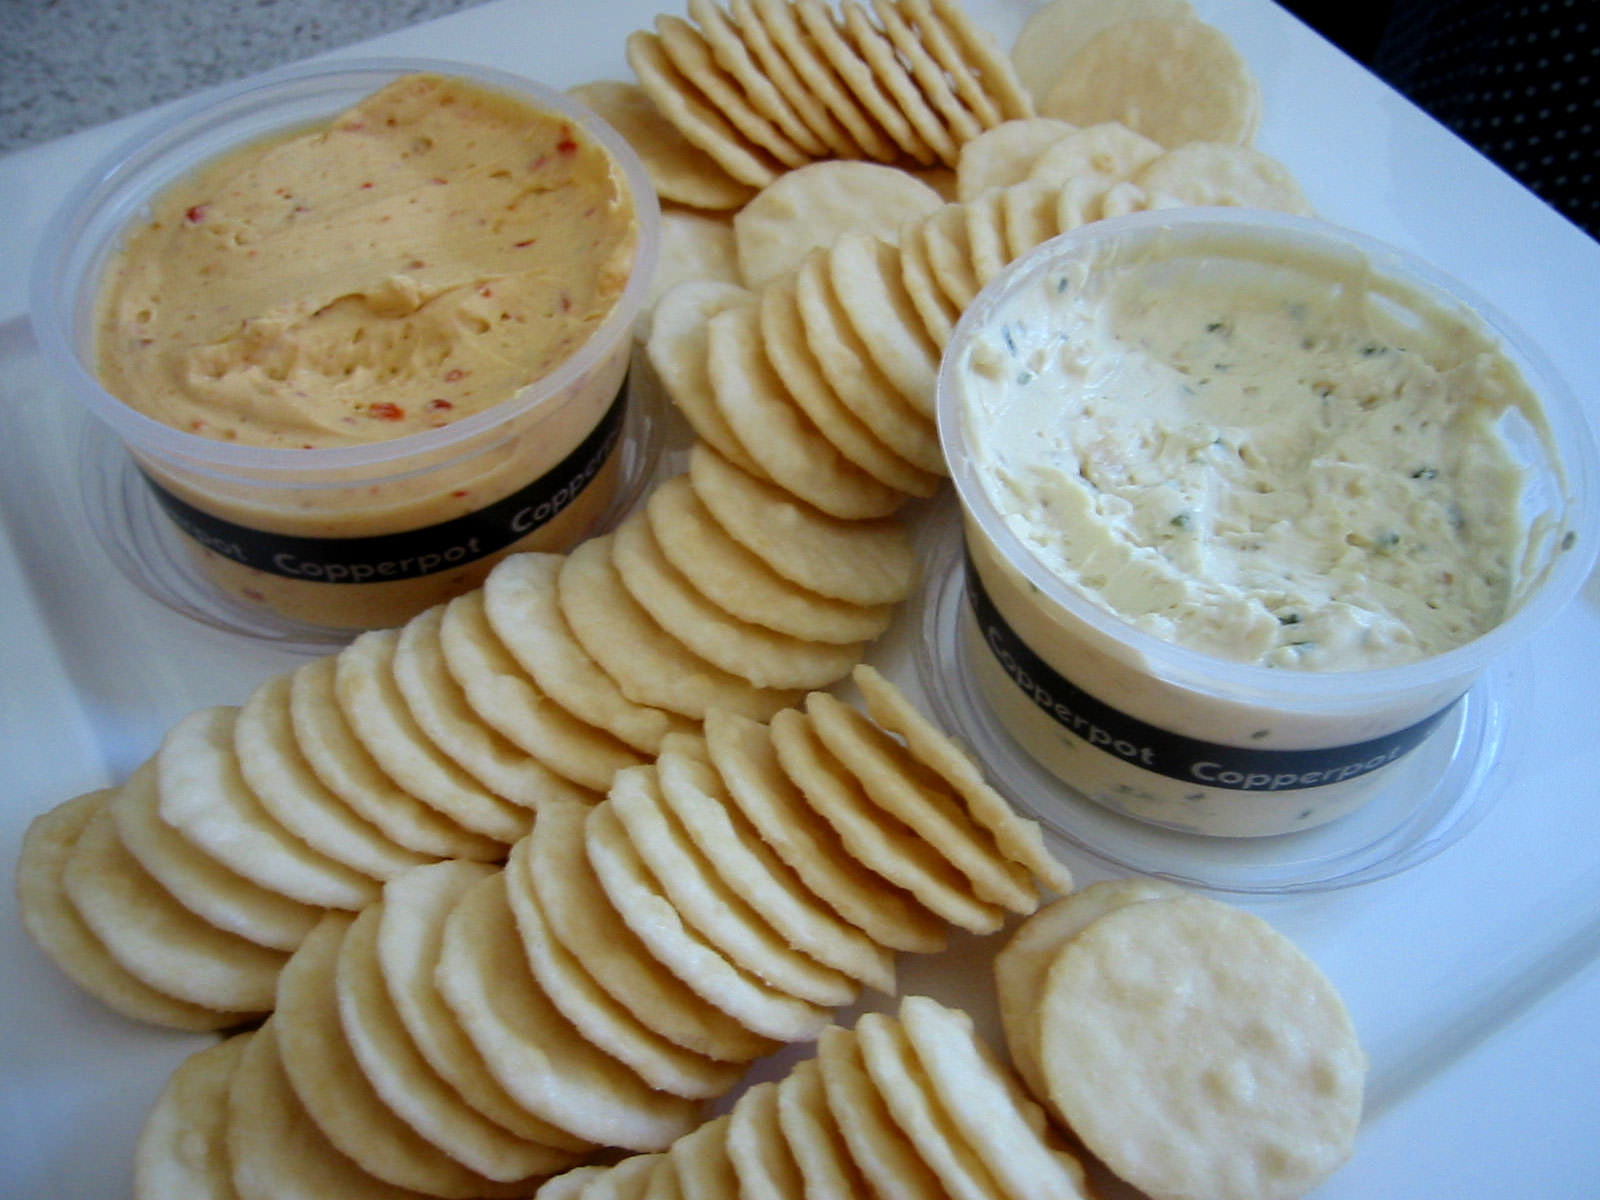 Rice crackers and two dips